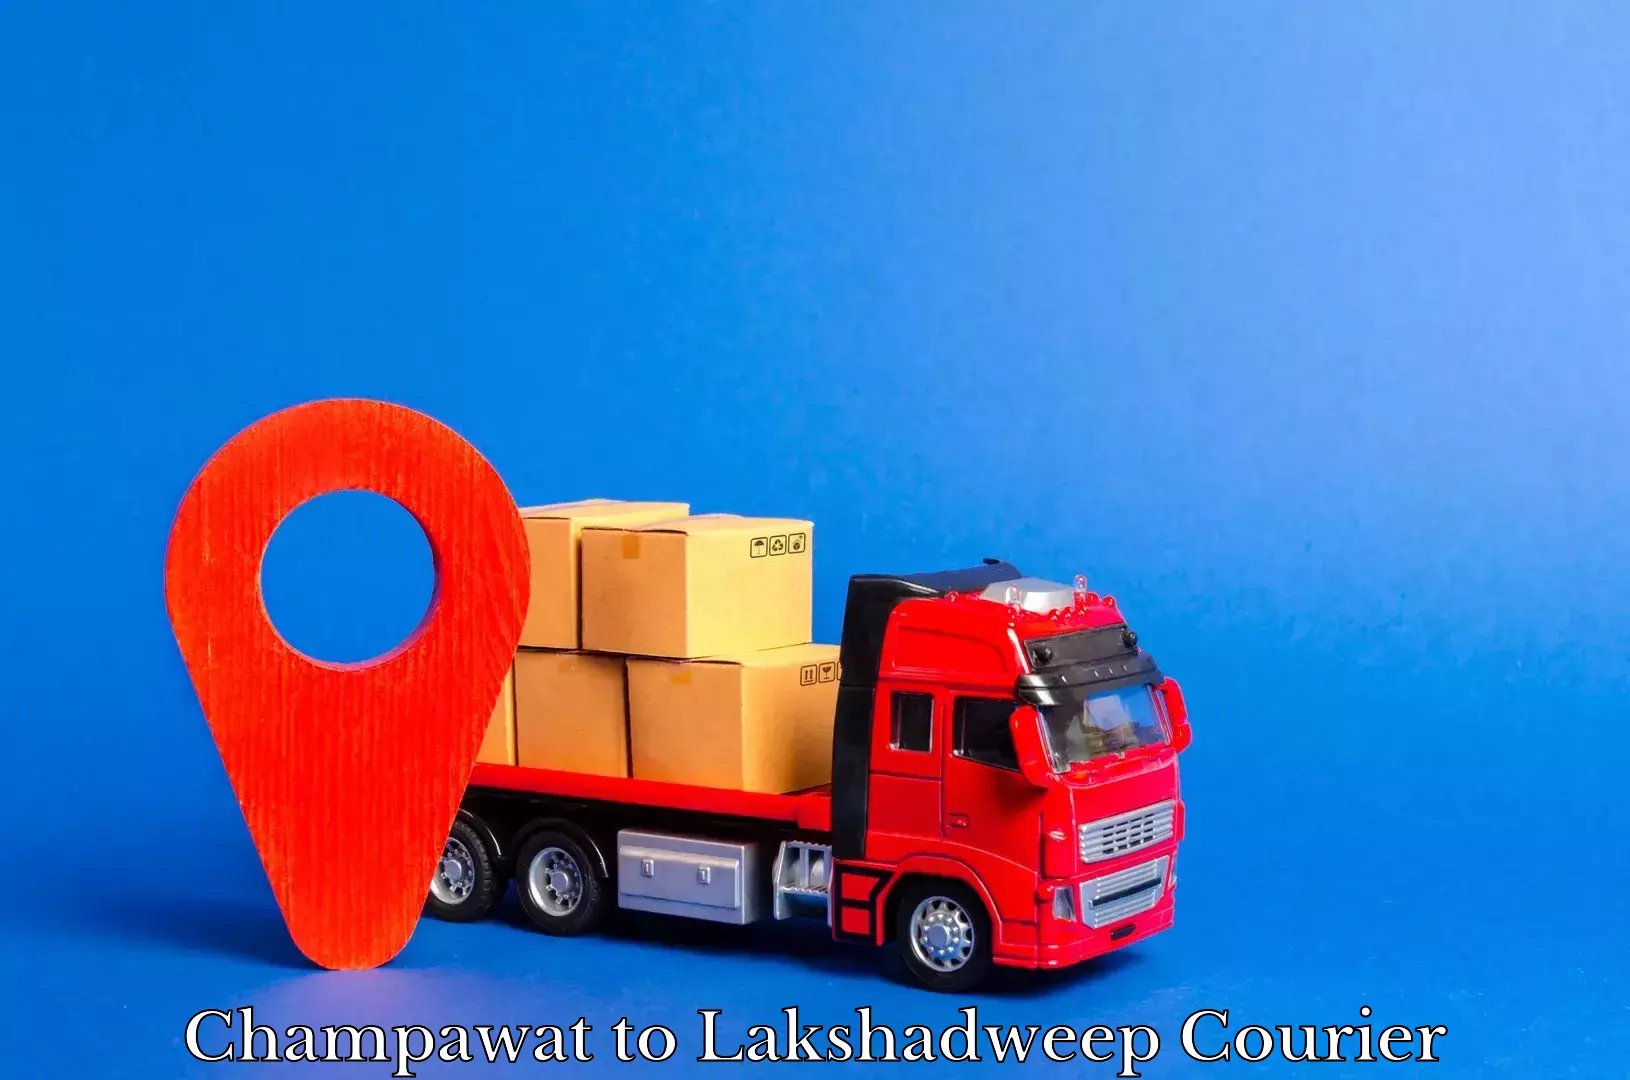 Modern courier technology Champawat to Lakshadweep